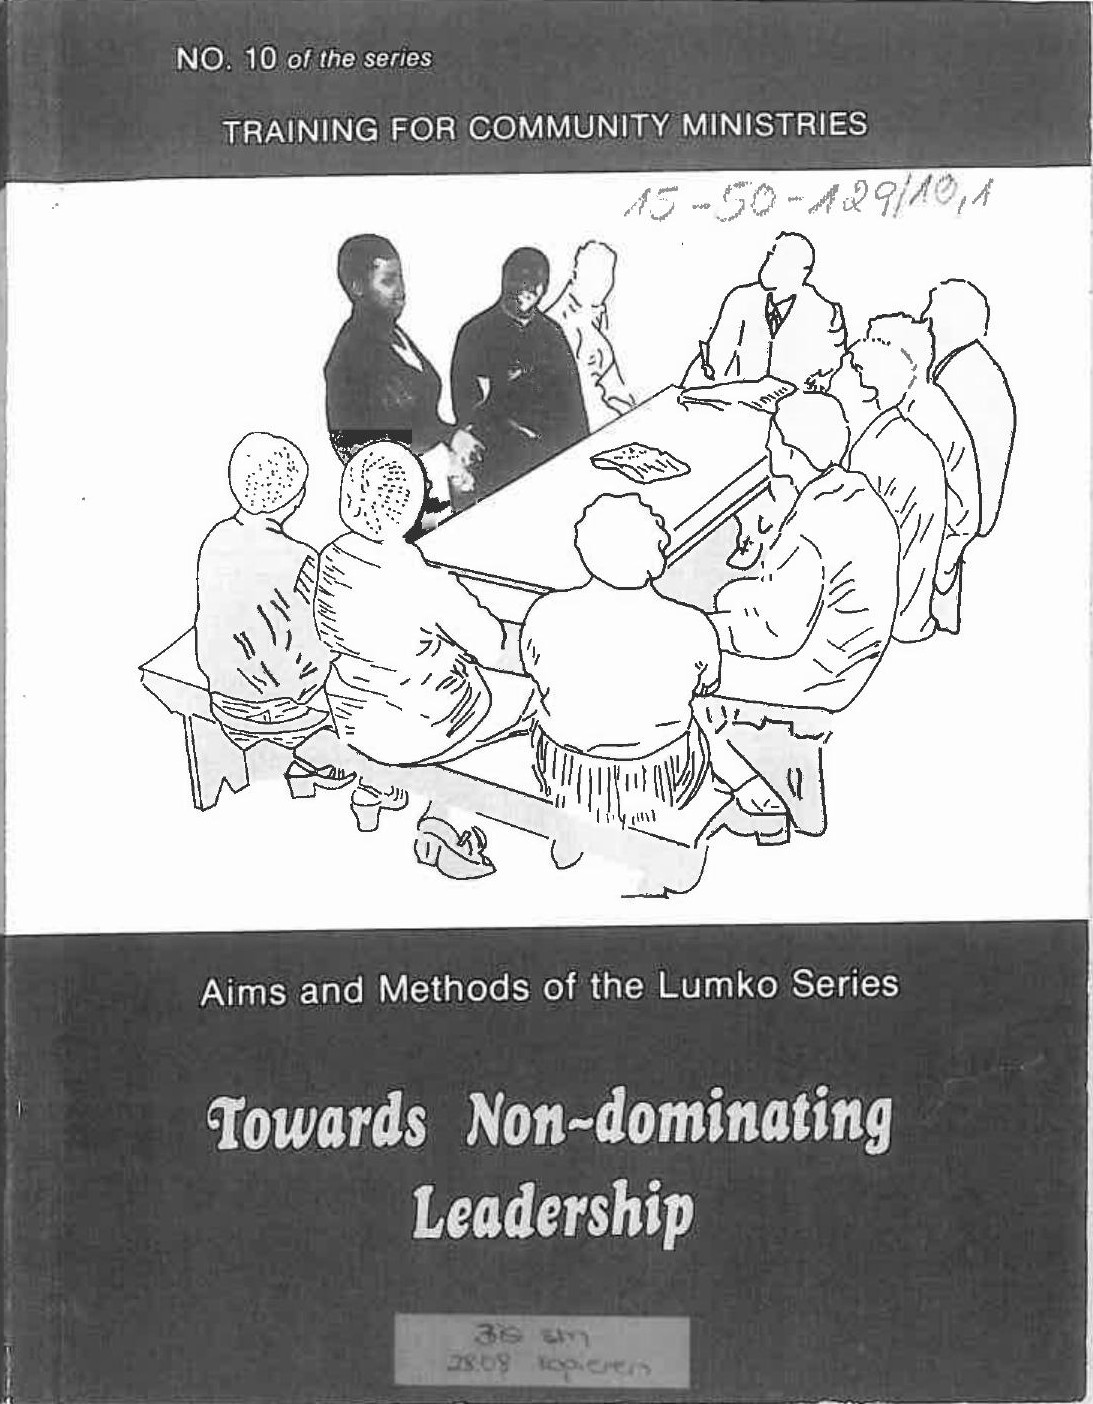 Towards Non-Dominating Leadership: Aims and Methods of the Lumko Series